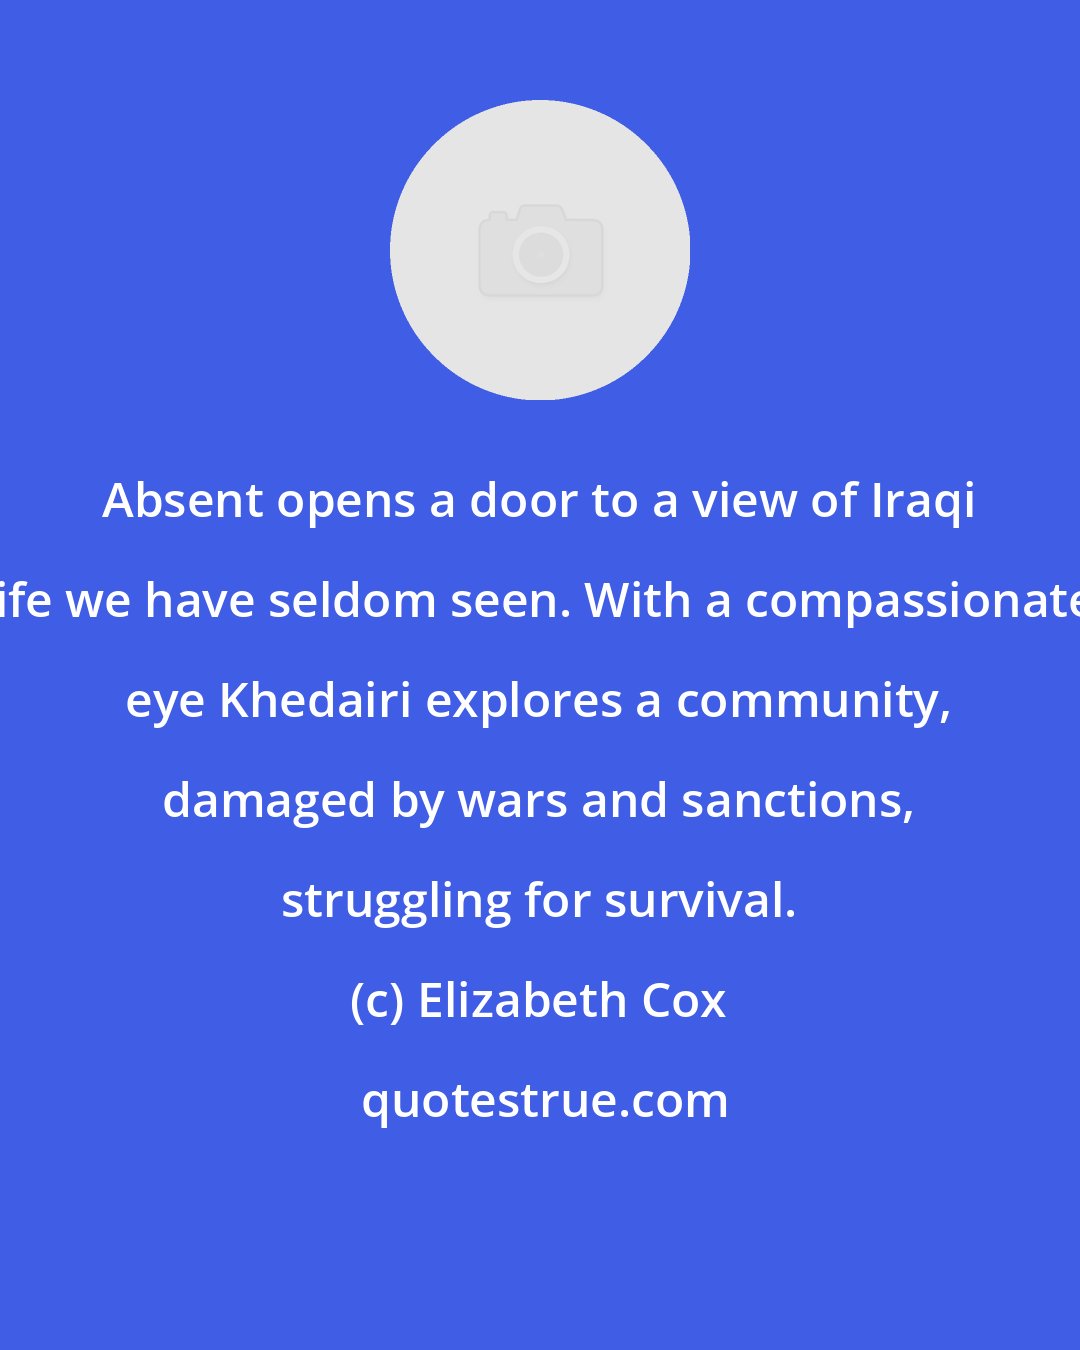 Elizabeth Cox: Absent opens a door to a view of Iraqi life we have seldom seen. With a compassionate eye Khedairi explores a community, damaged by wars and sanctions, struggling for survival.